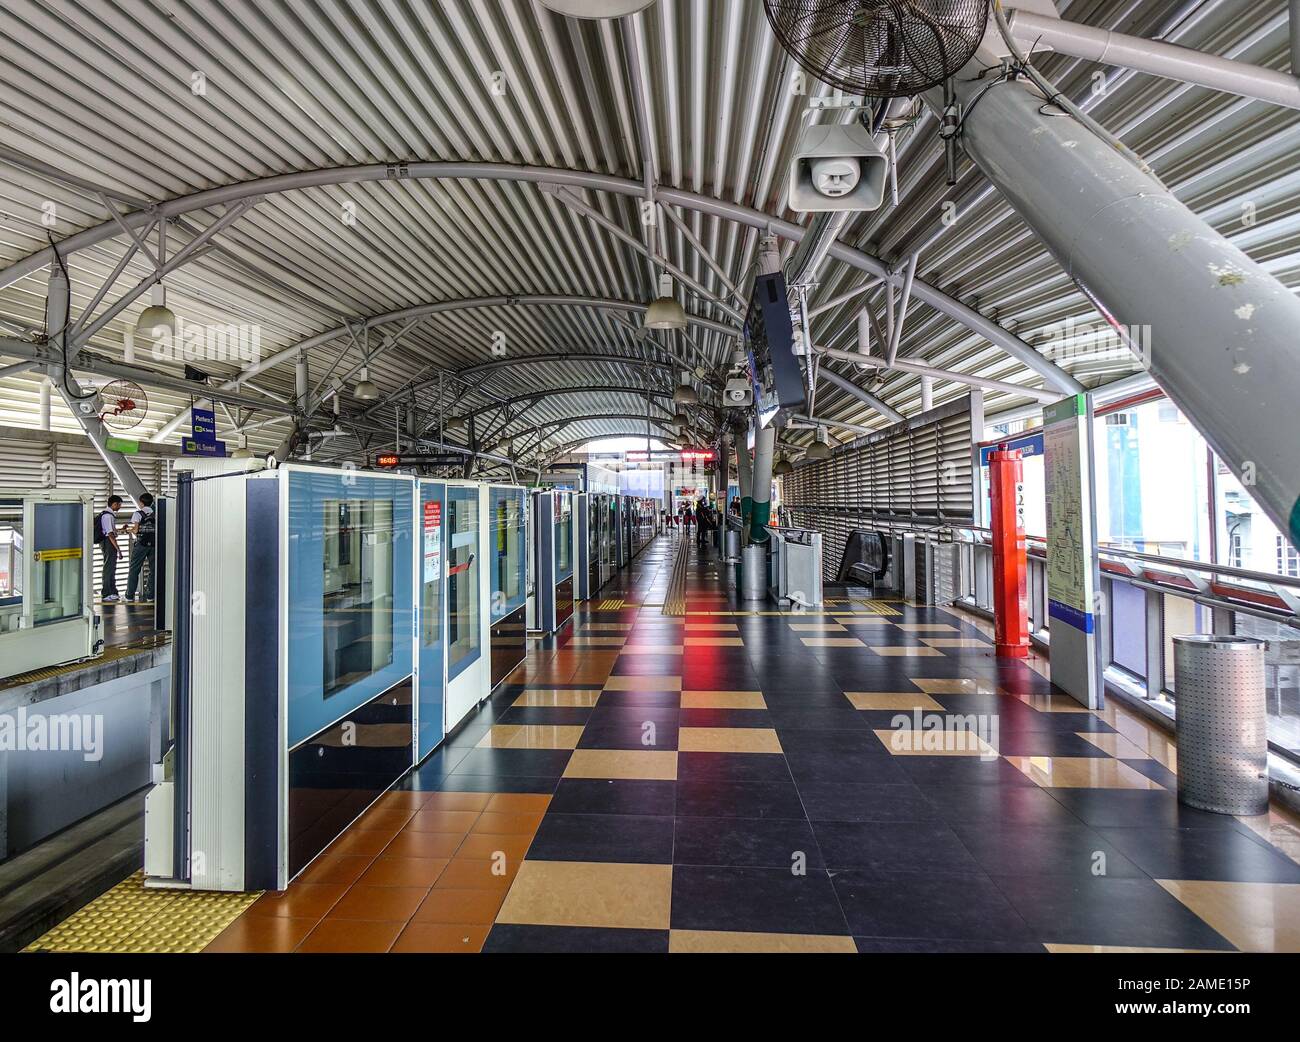 Page 2 Mrt Malaysia High Resolution Stock Photography And Images Alamy